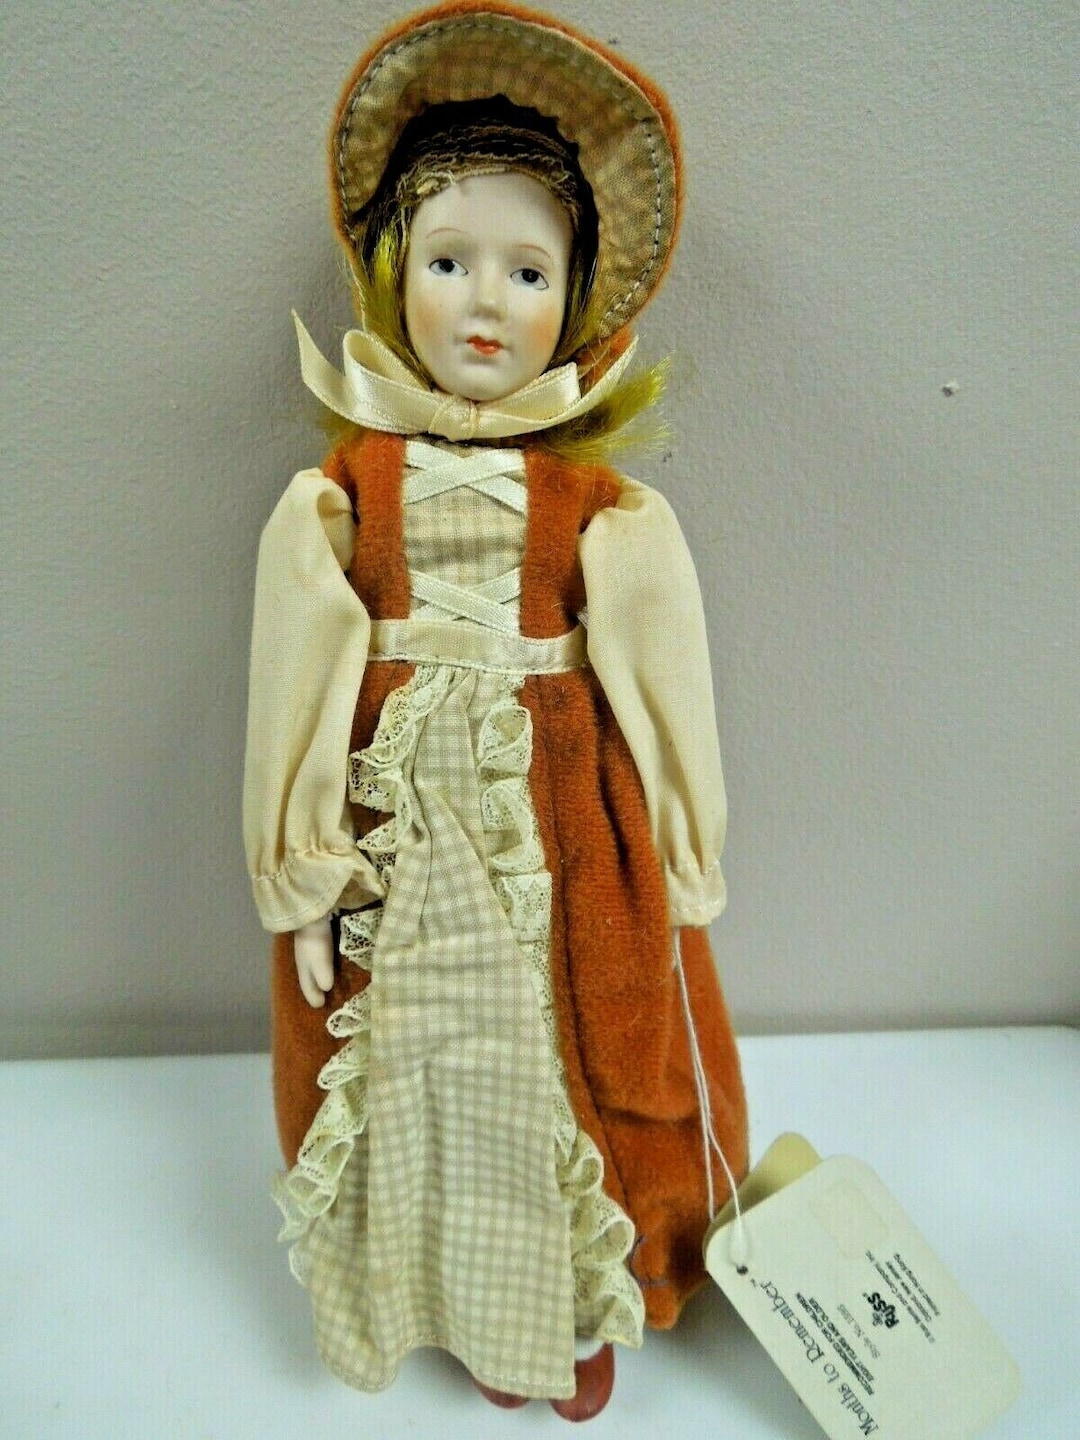 Q962 Months to Remember November Doll Russ Berrie No 1595 Porcelain - Etsy